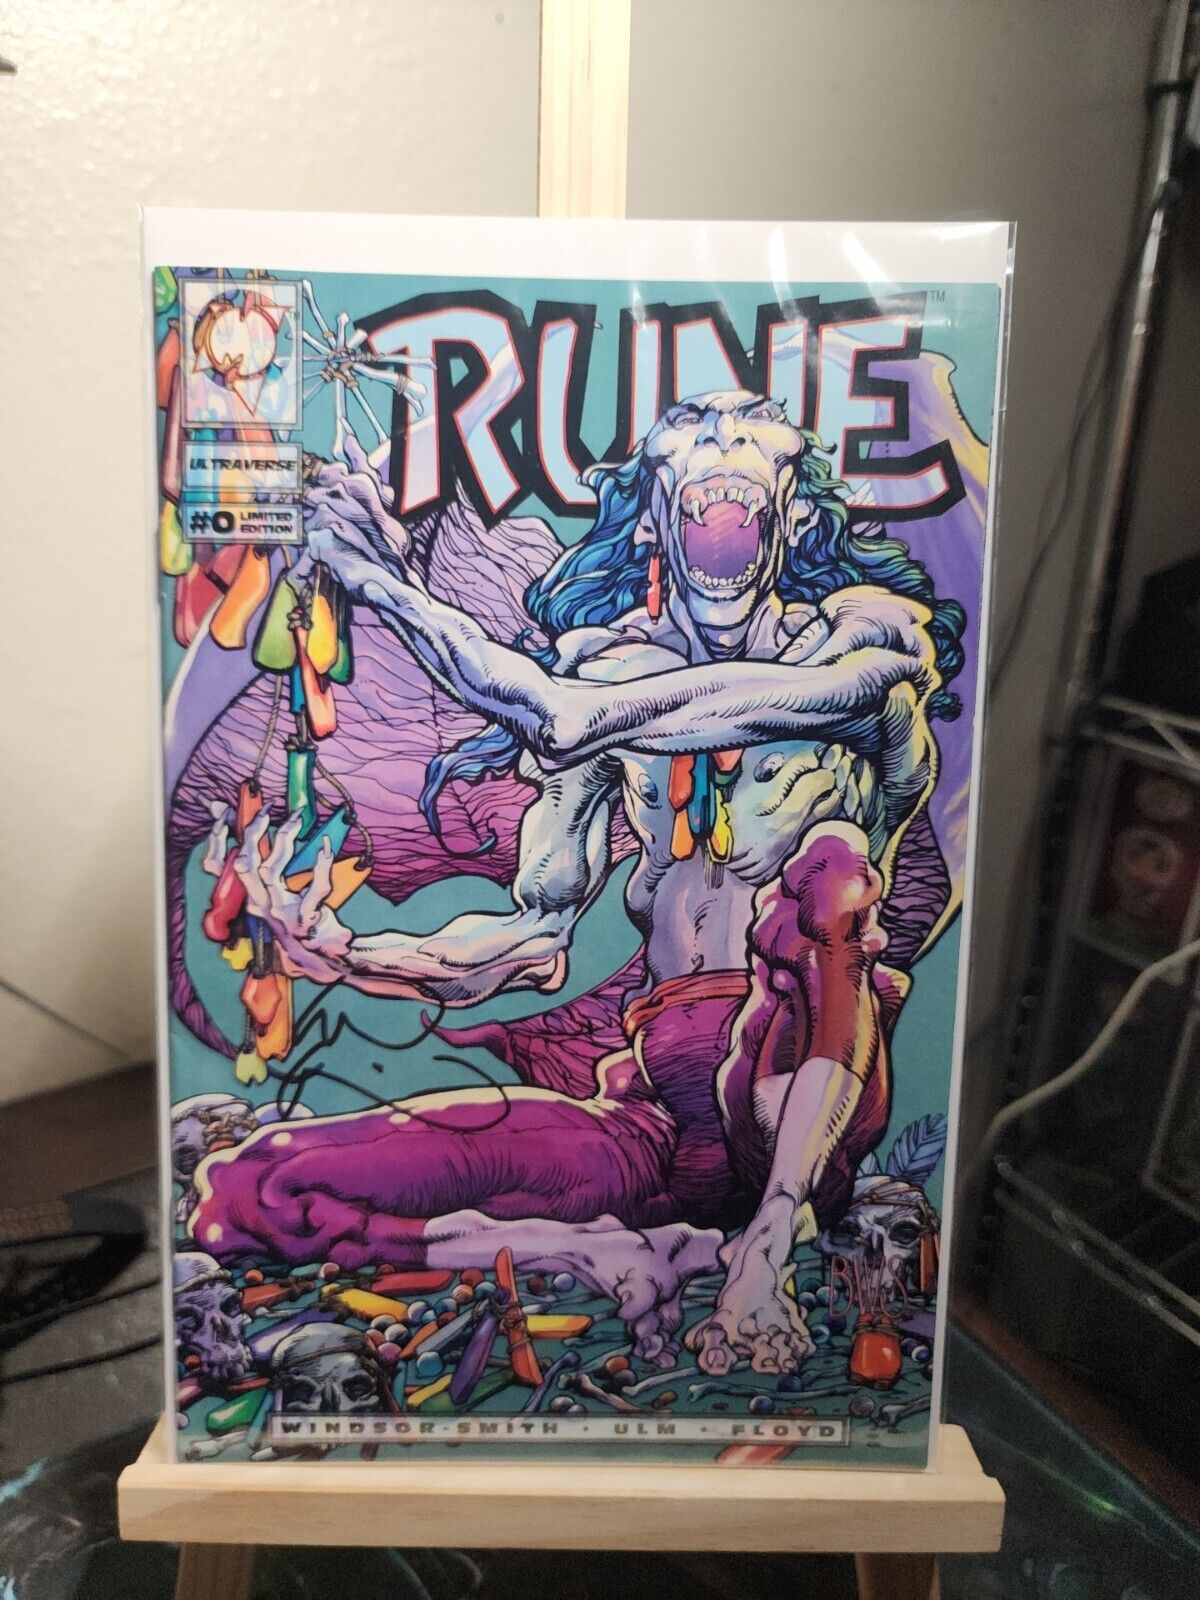 Rune 0 Signed By Barry Windsor Smith + Rare Poster.